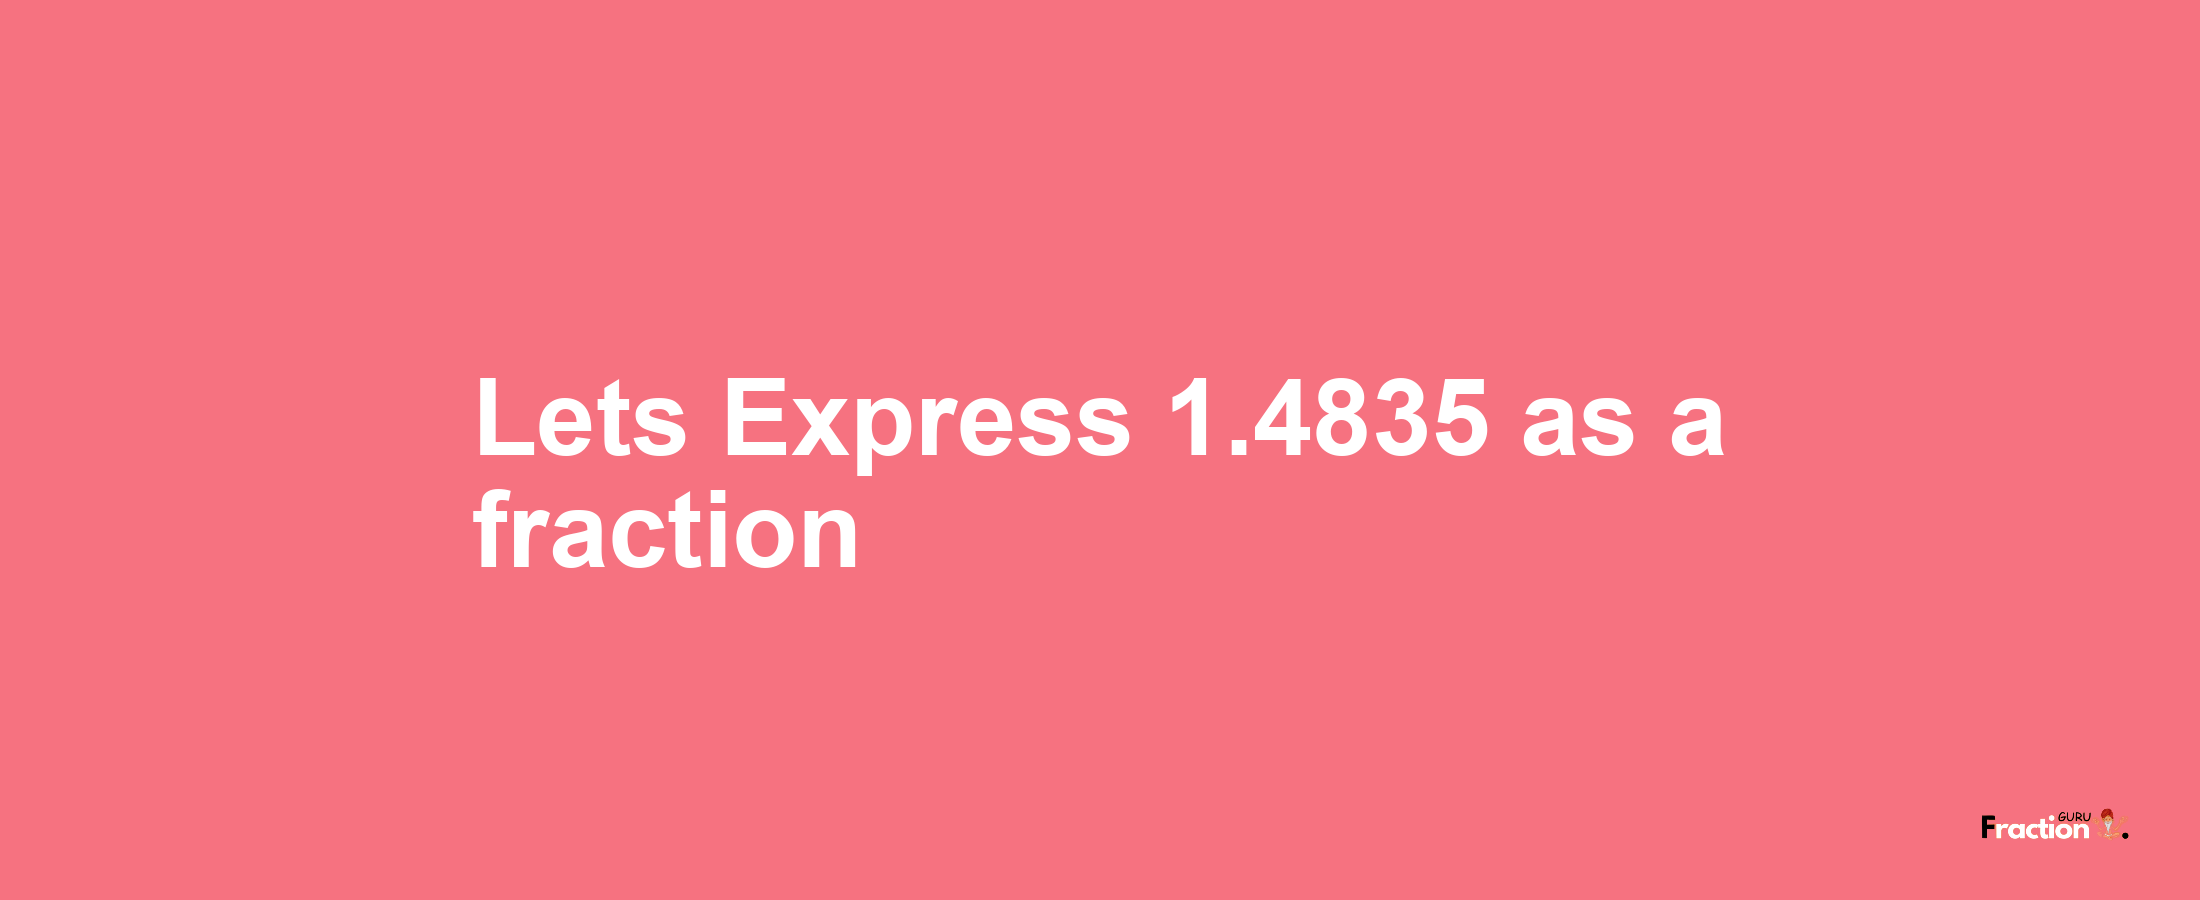 Lets Express 1.4835 as afraction